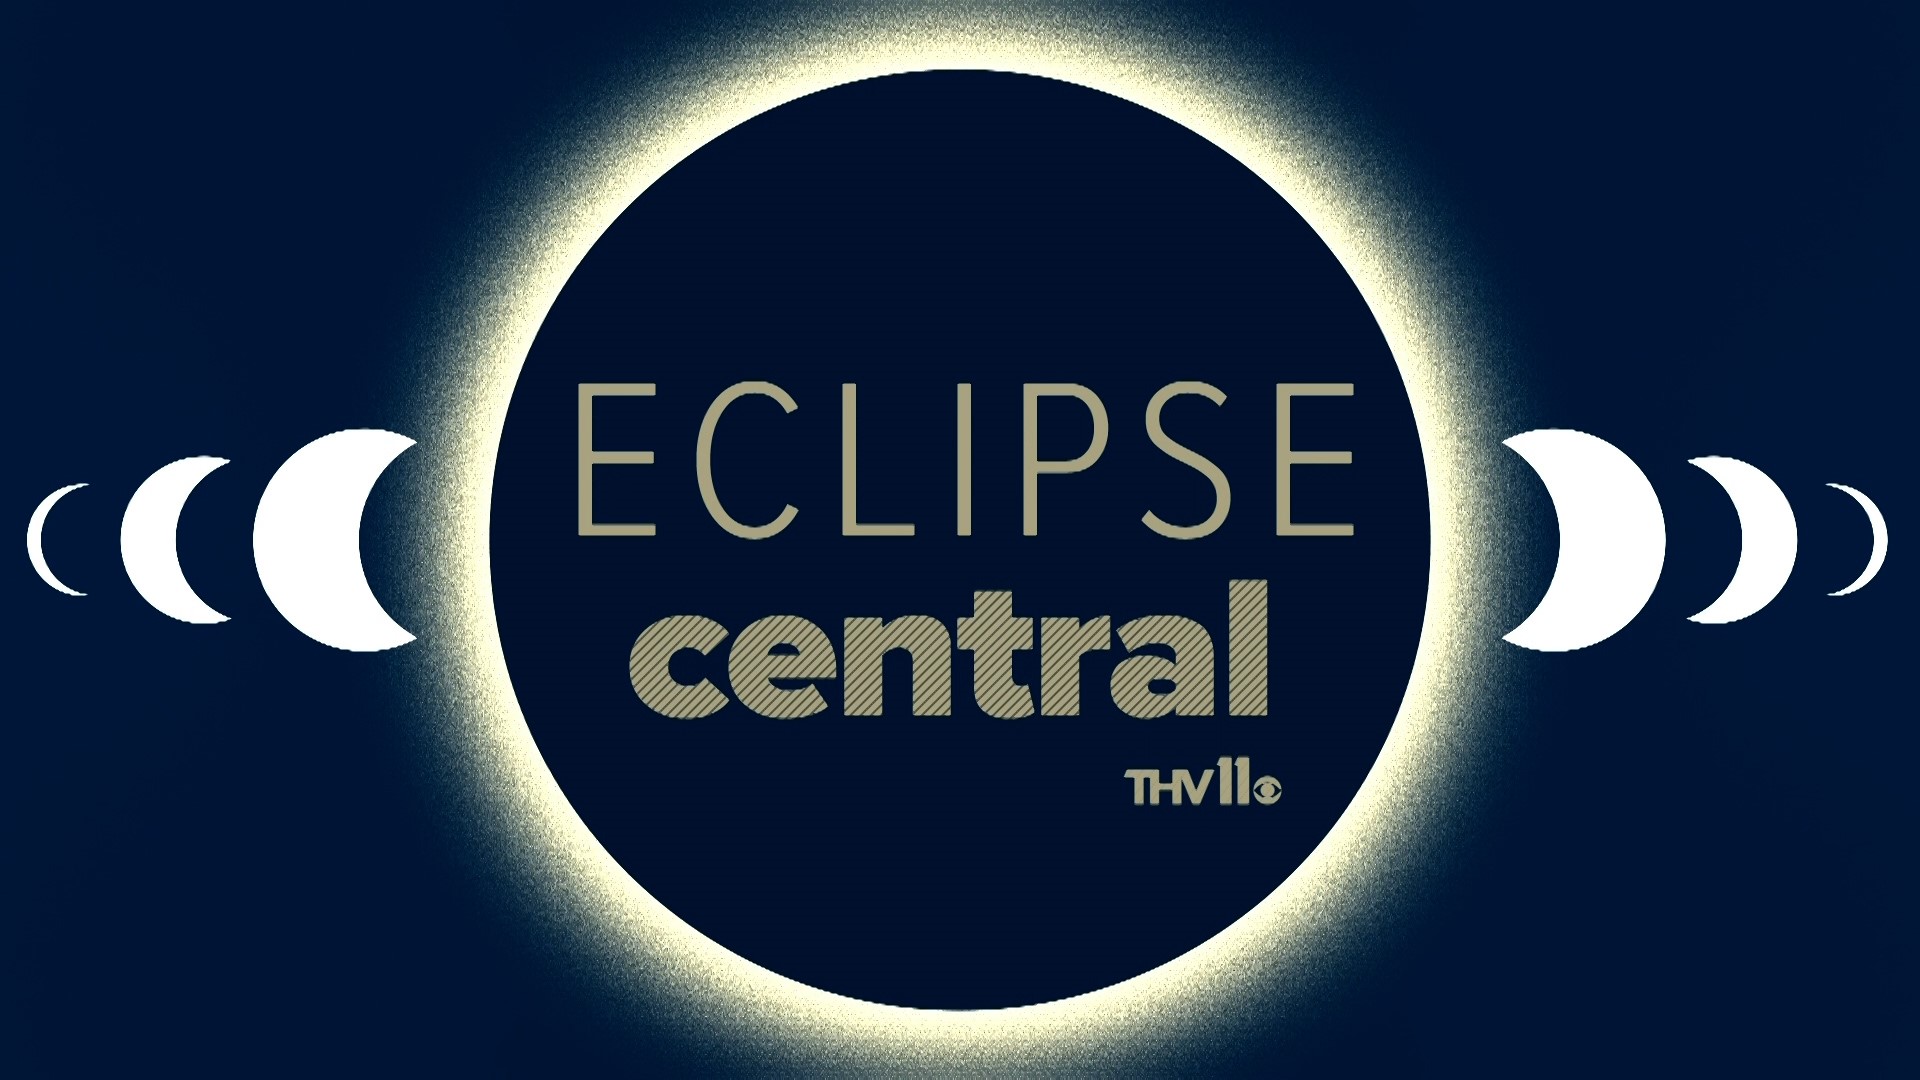 At THV11, we are your central hub for all this eclipse and telling you everything you need to know about it!